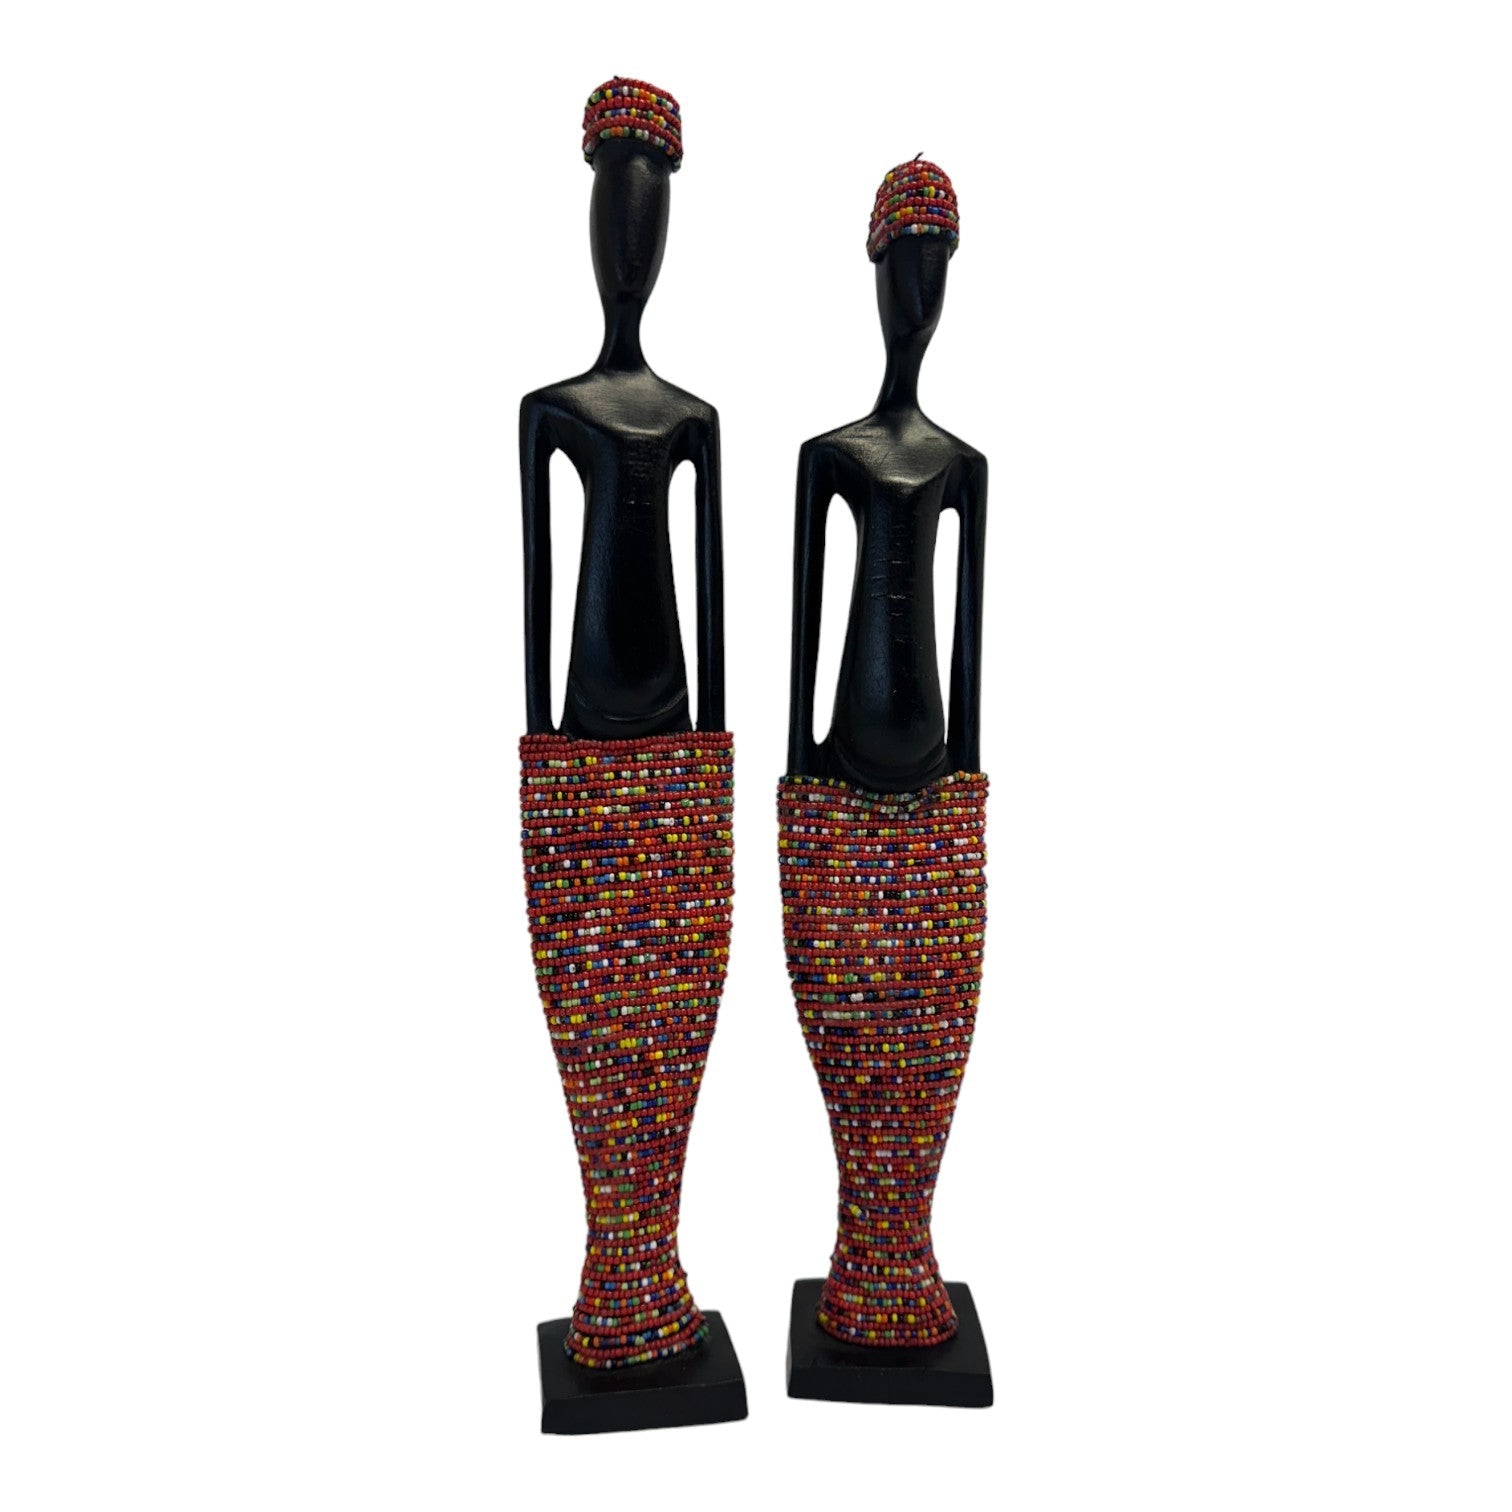 Standing African wooden Carved and Beaded Sculpture